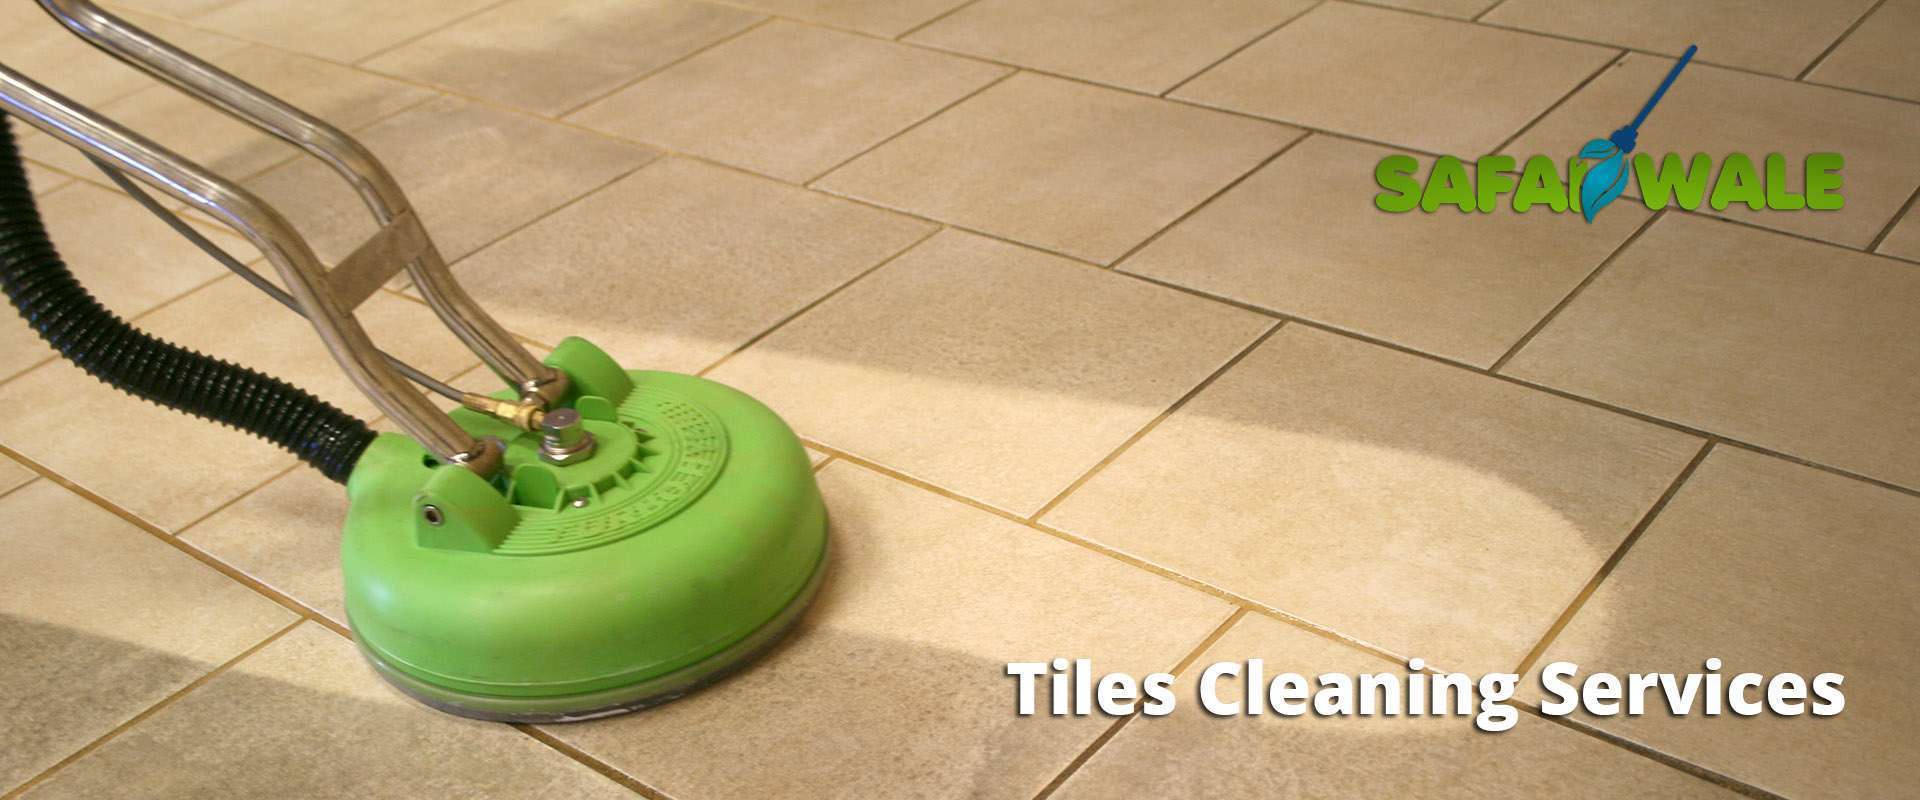 Tiles Cleaning Services In Patna